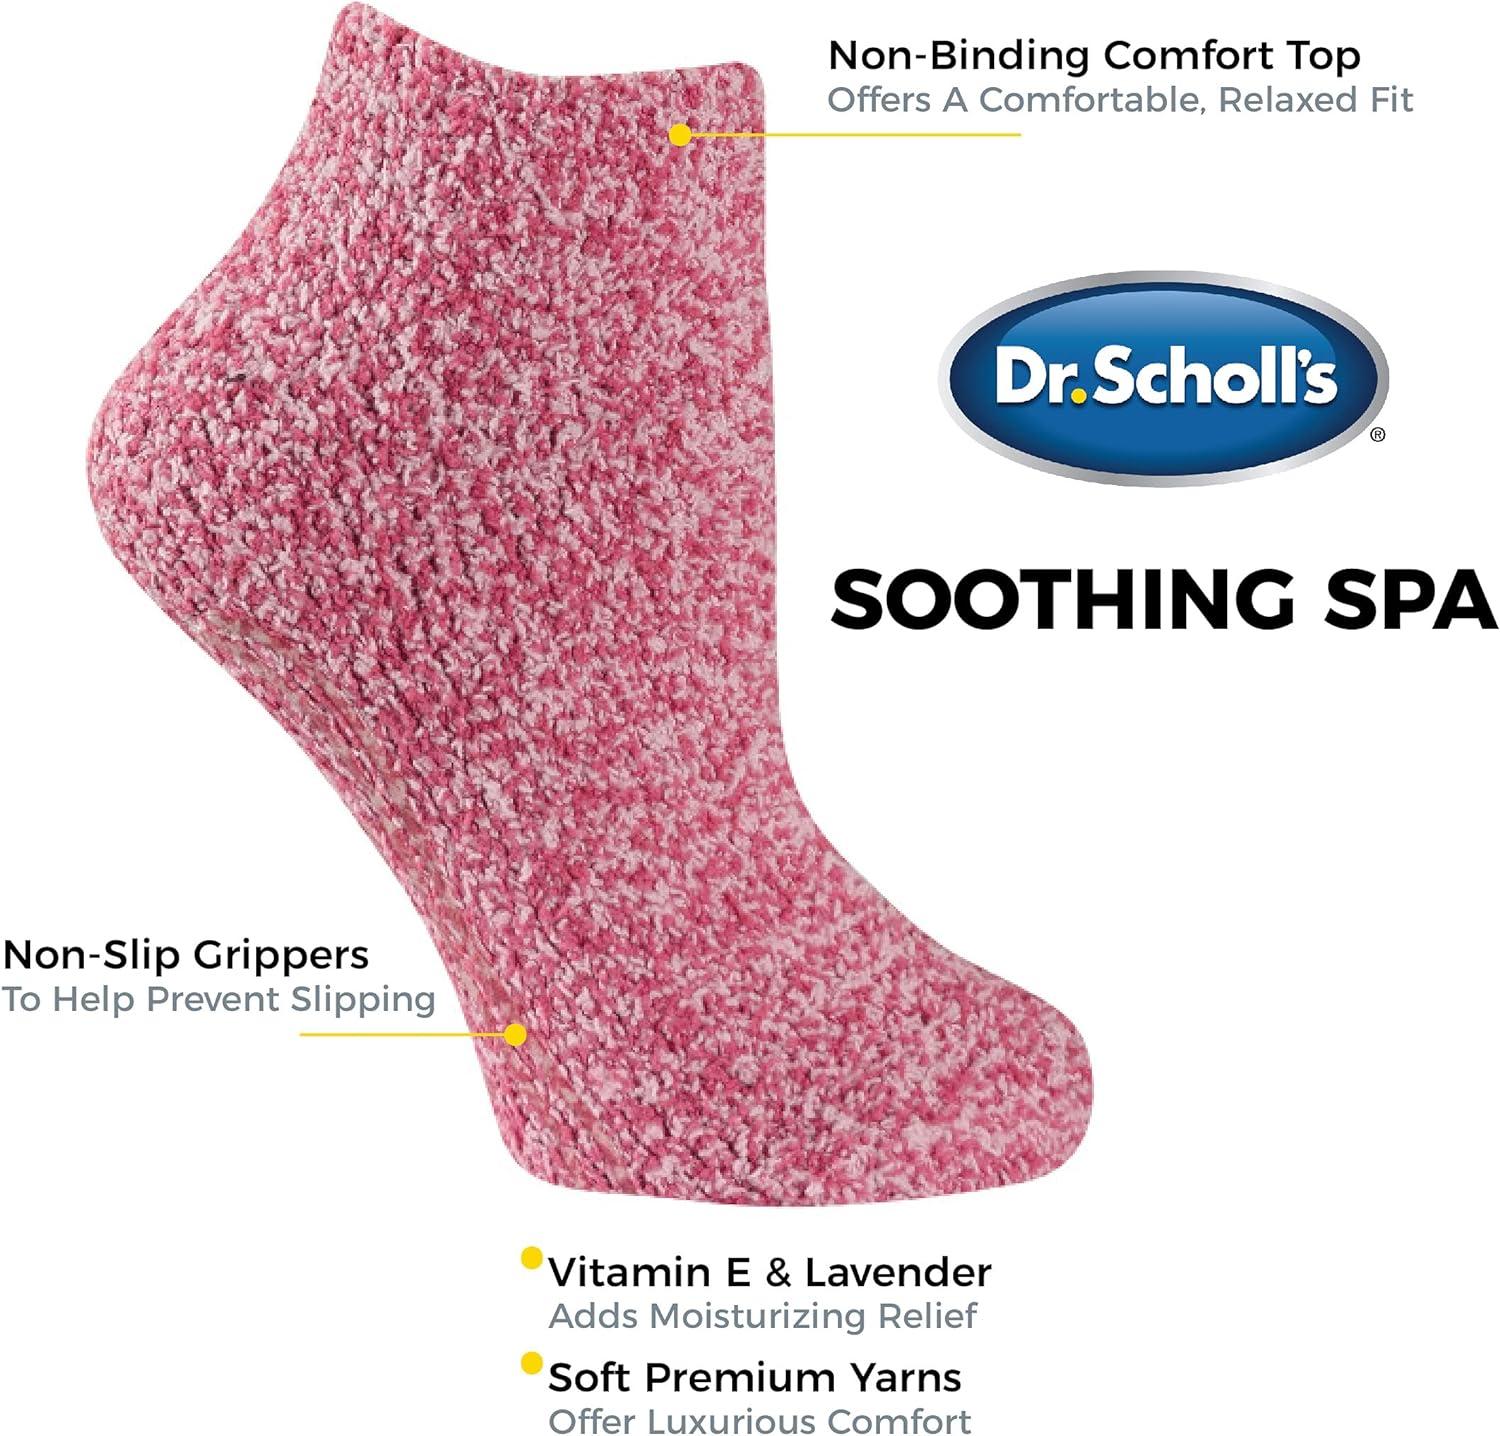 Dr. Scholl's Women's Low Cut Soothing Spa Socks - Lavender & Vitamin E  Infused - 2 & 3 Pair Packs - Bottom Grippers Low Cut 4-10 2 Pink/Blue